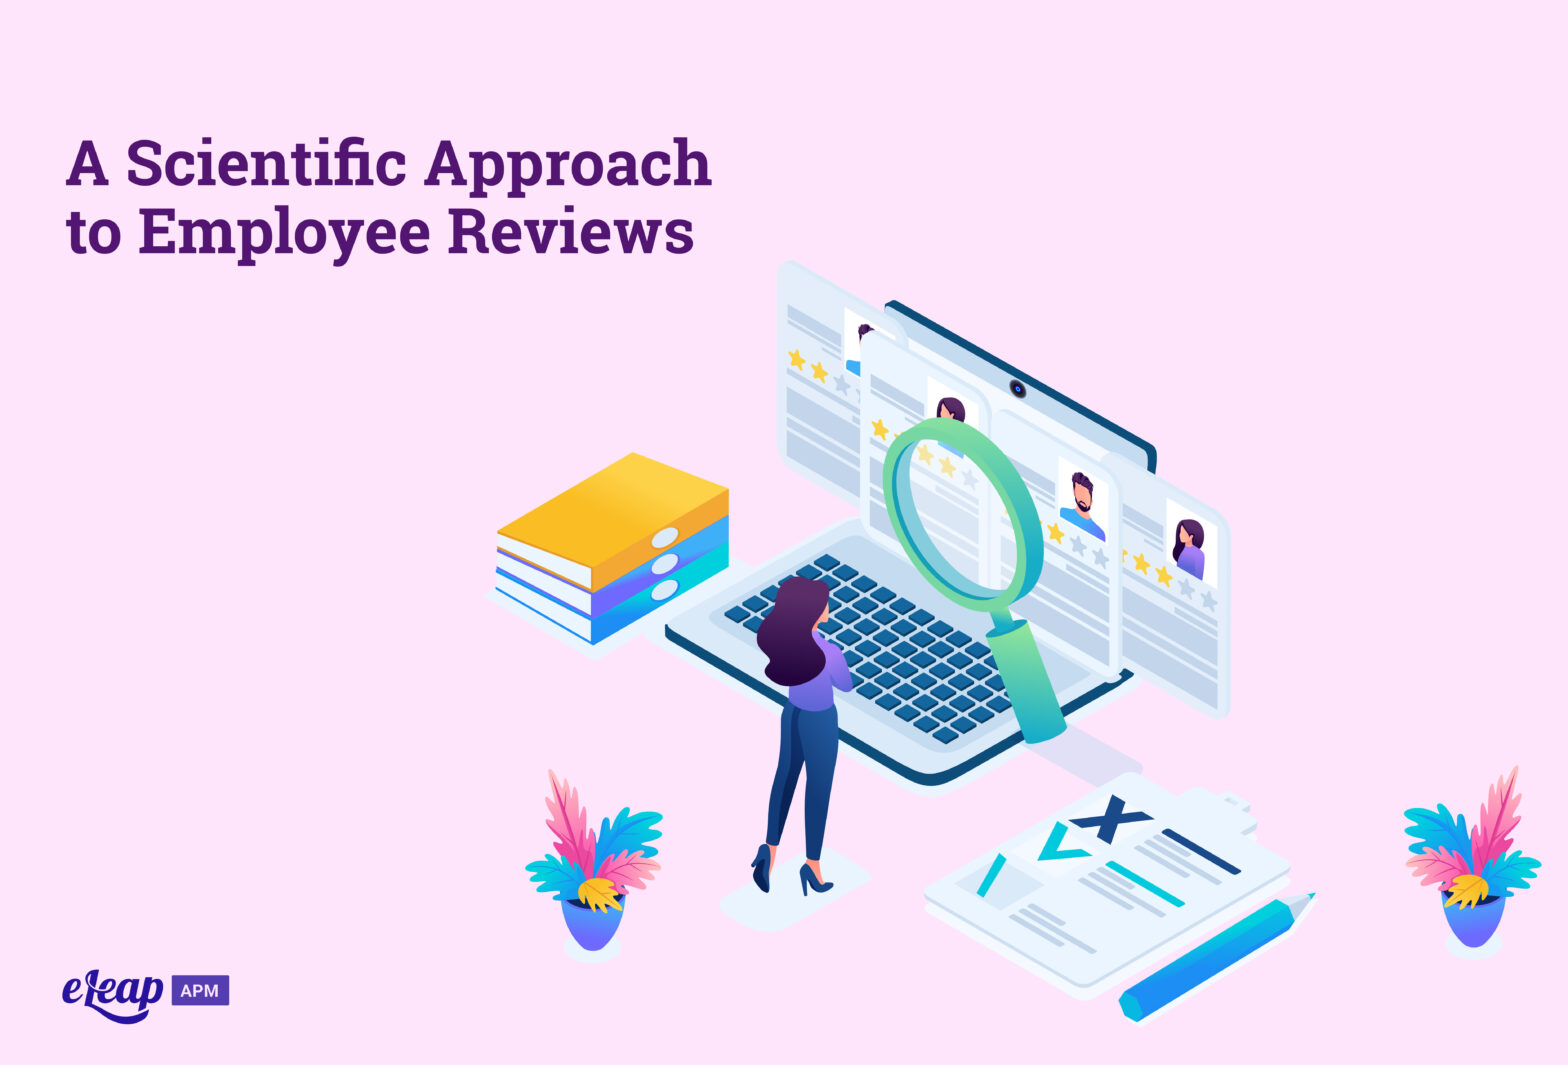 A Scientific Approach to Employee Reviews